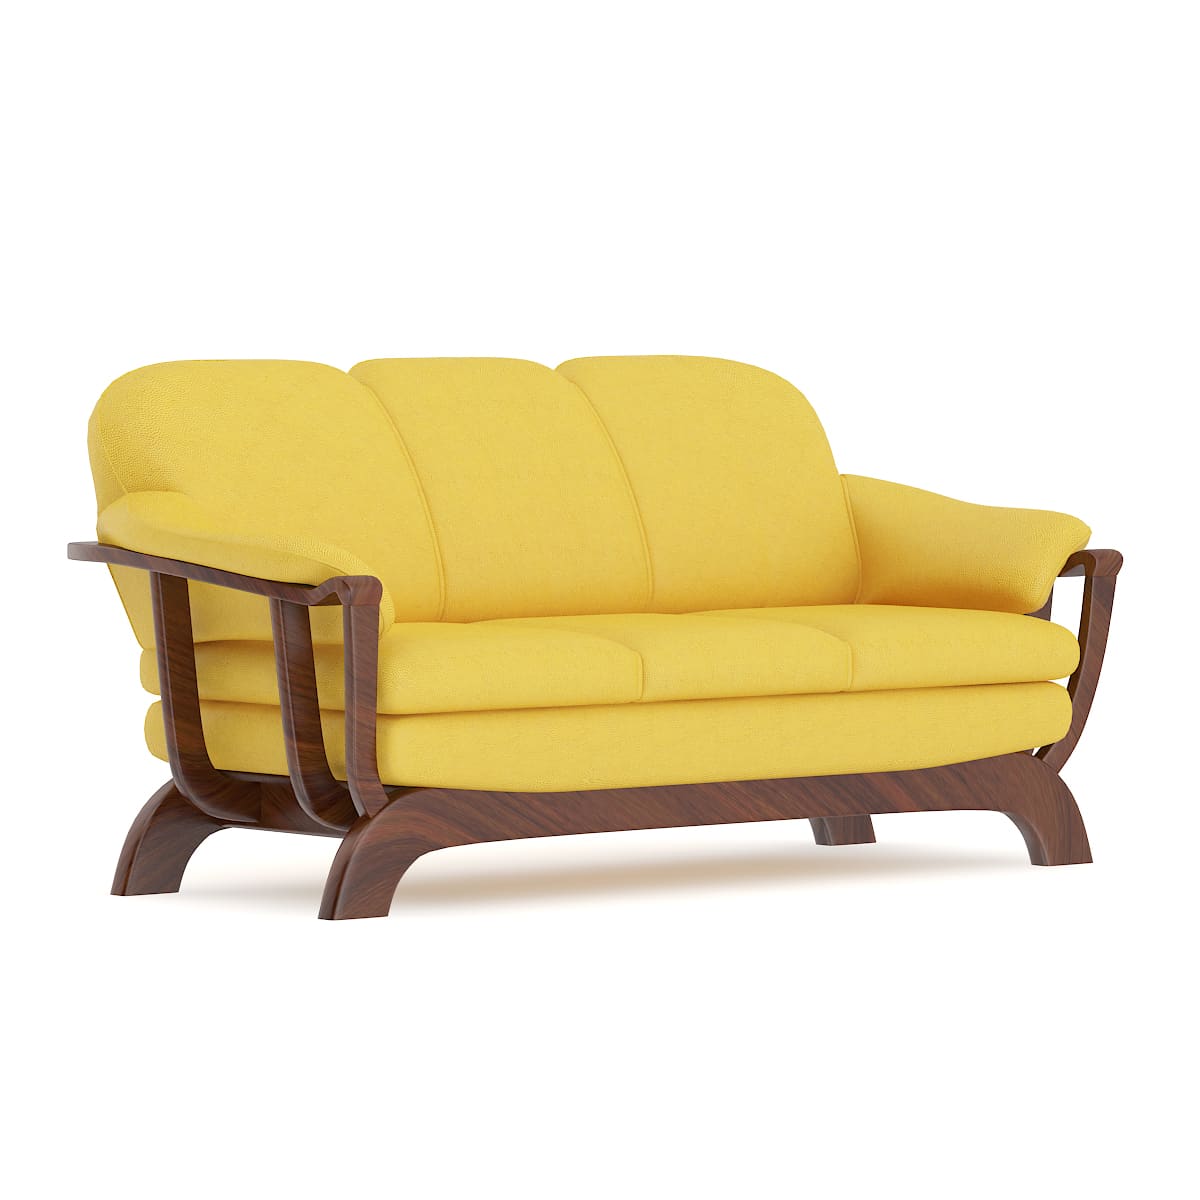 Yellow Sofa With Wooden Frame, Wooden Couch Frame